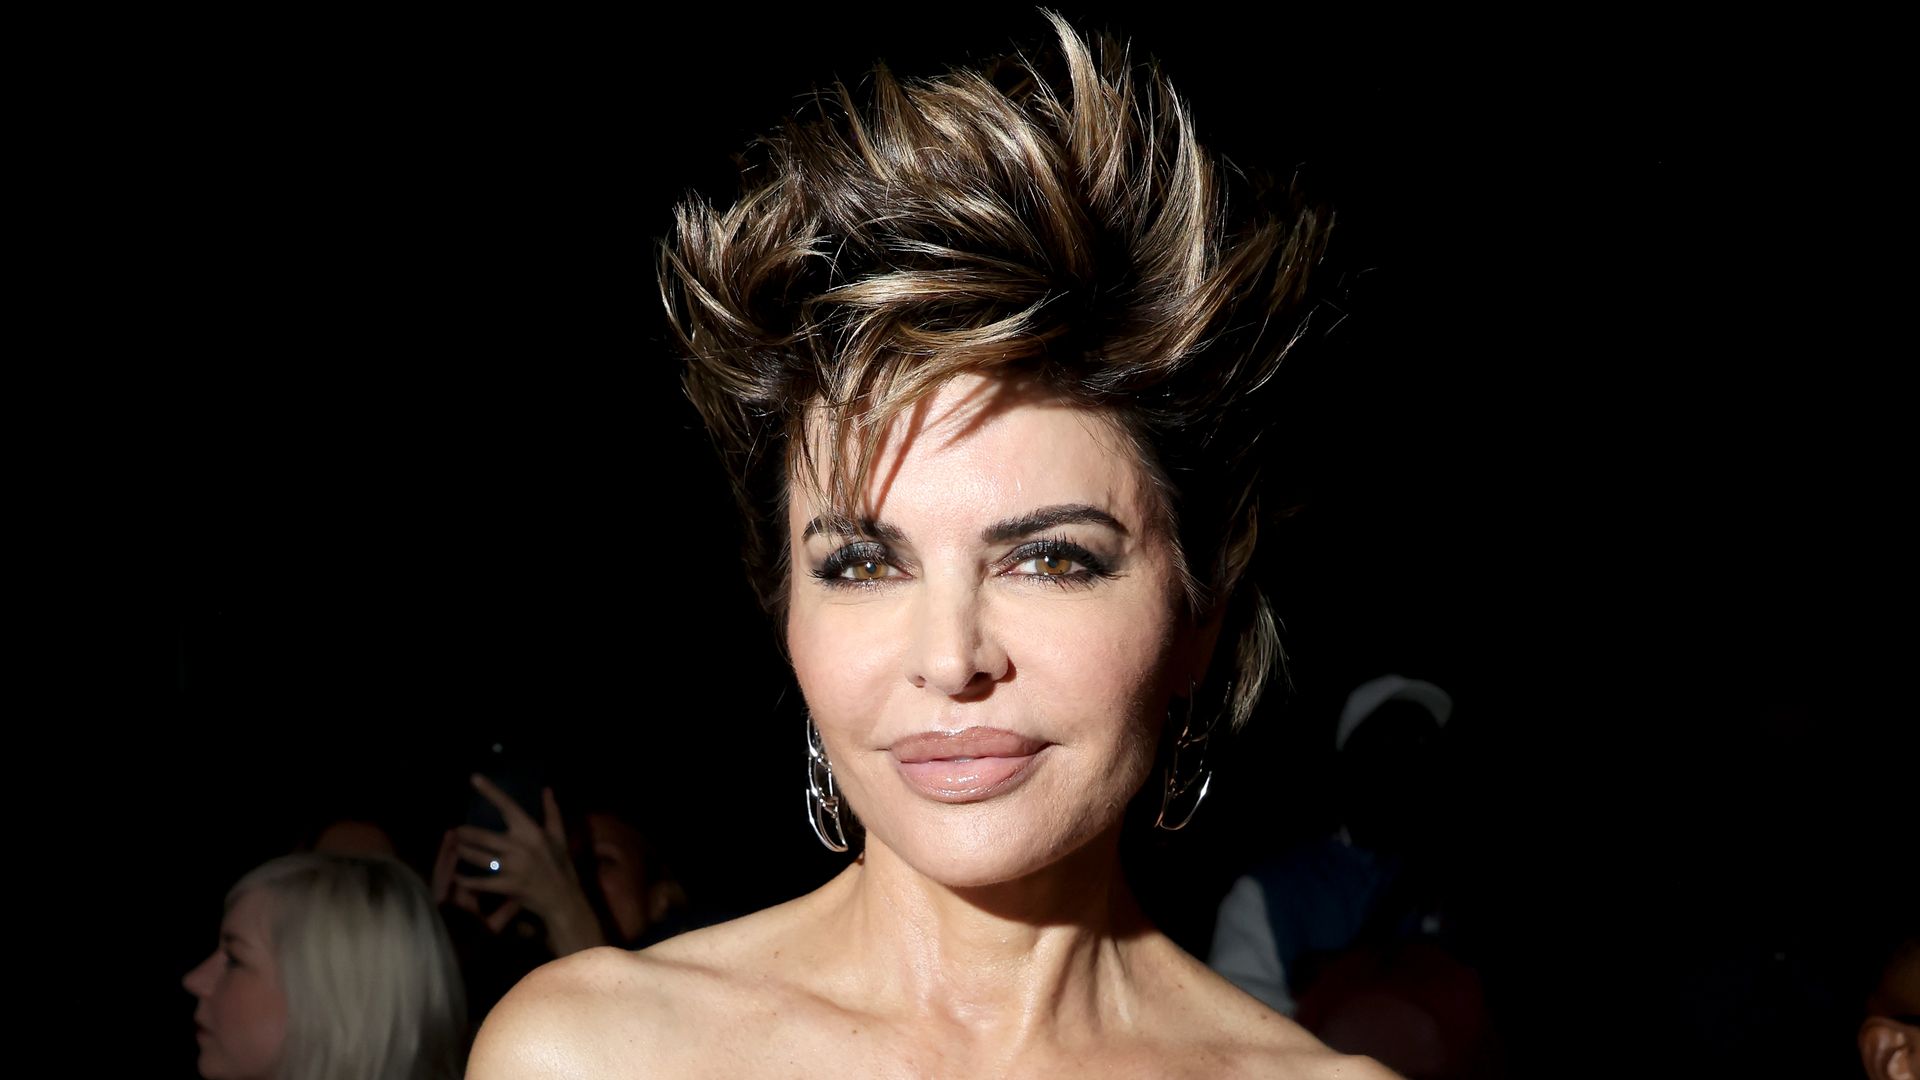 Lisa Rinna shares photo in fully sheer catsuit amid Real Housewives return